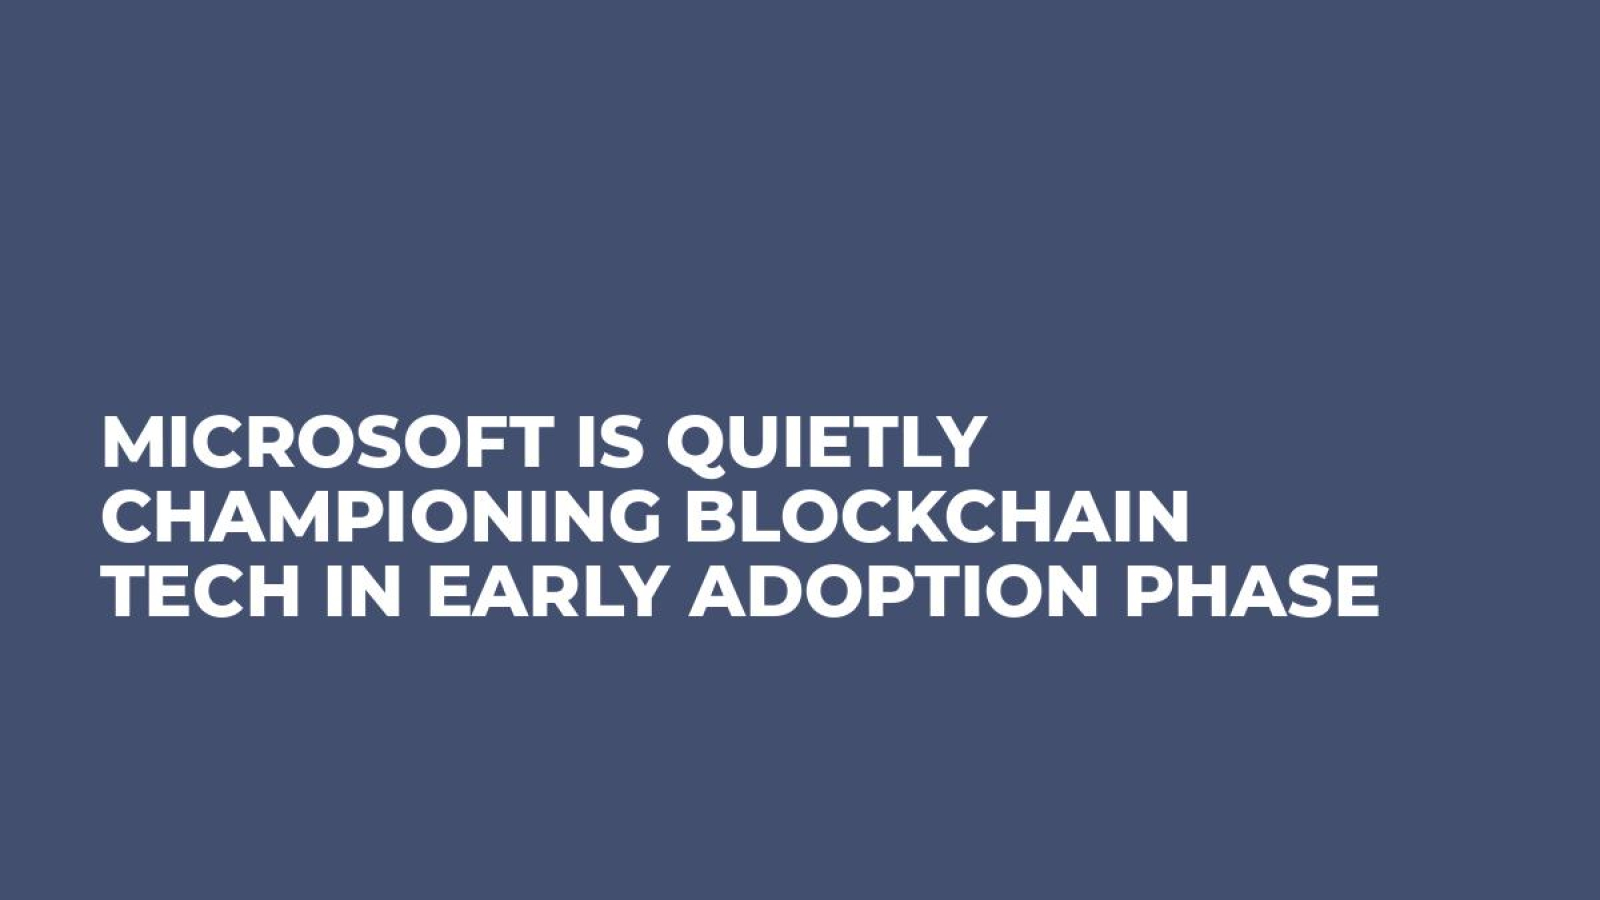 Microsoft is Quietly Championing Blockchain Tech in Early Adoption Phase